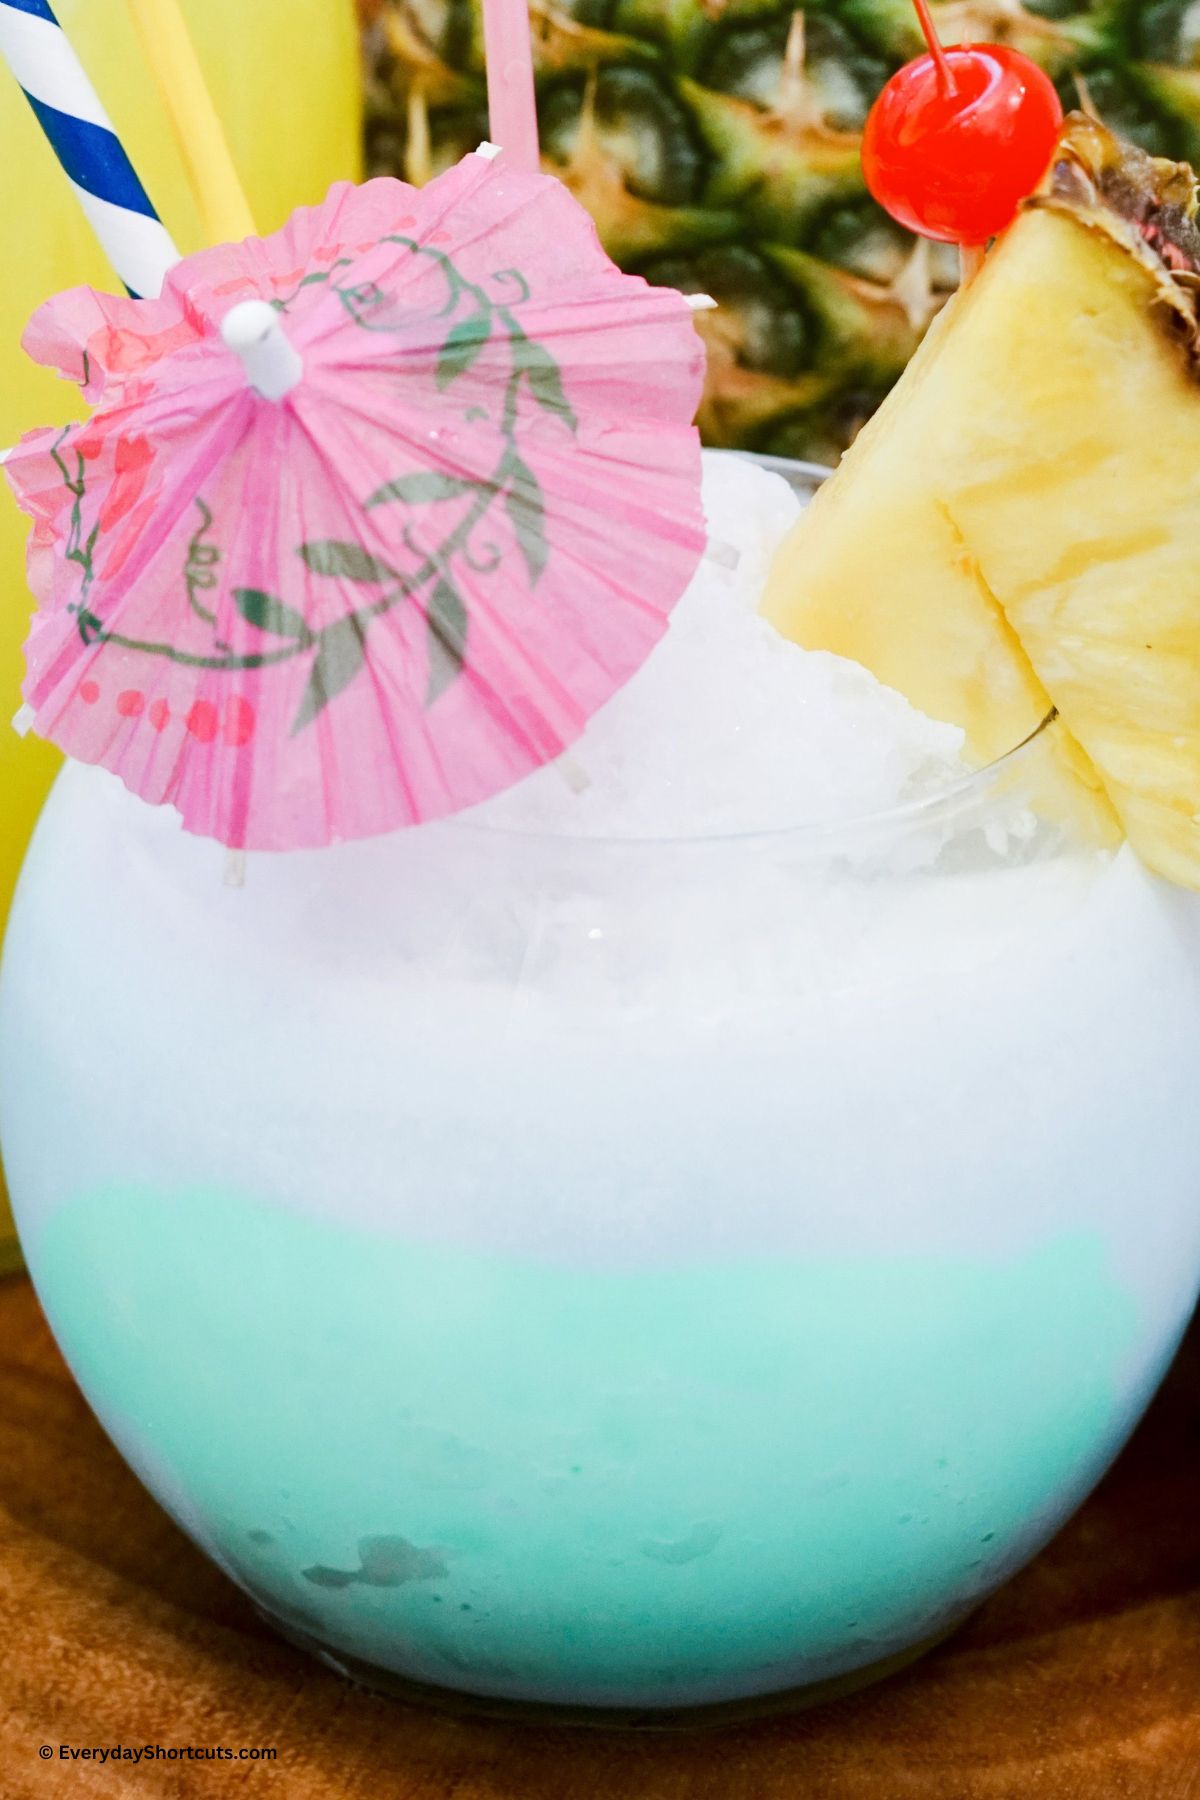 Island drink in a fishbowl